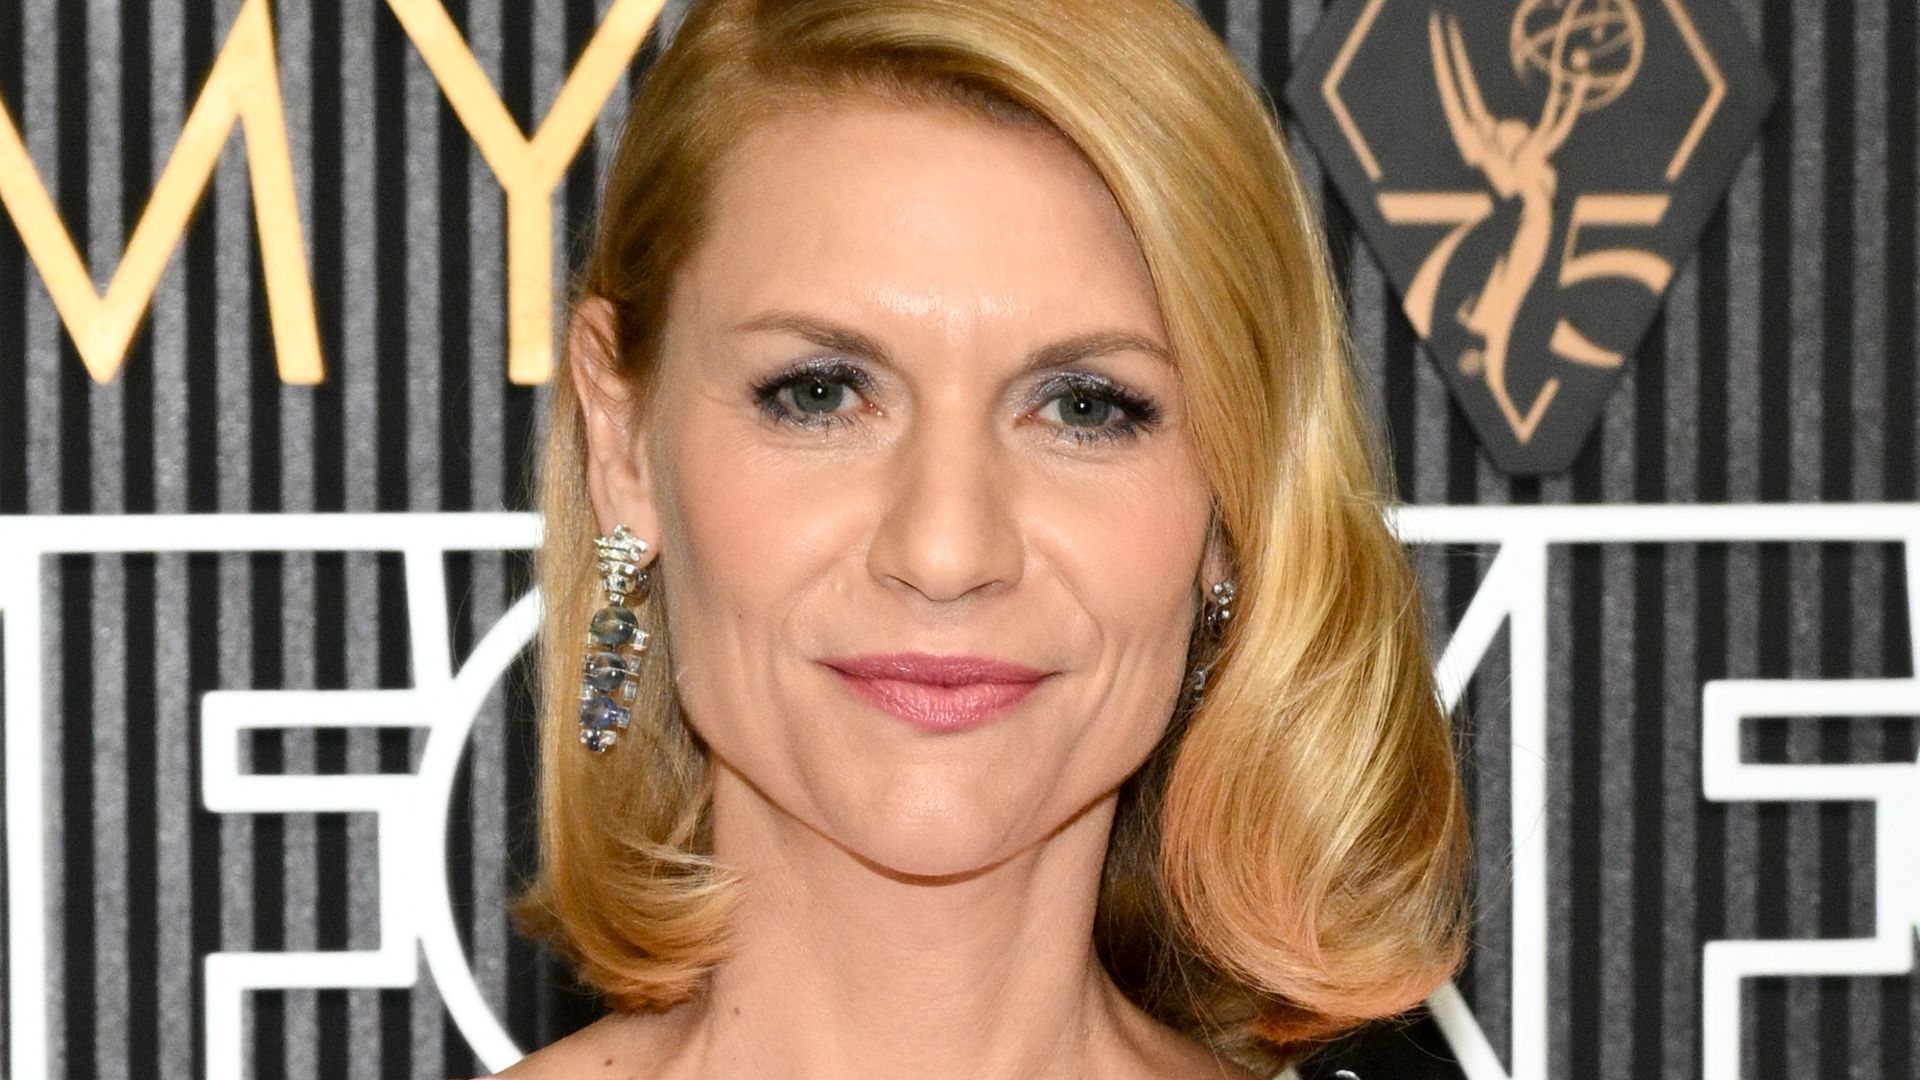 Claire Danes, 44, wears backless dress for first red carpet appearance since giving birth